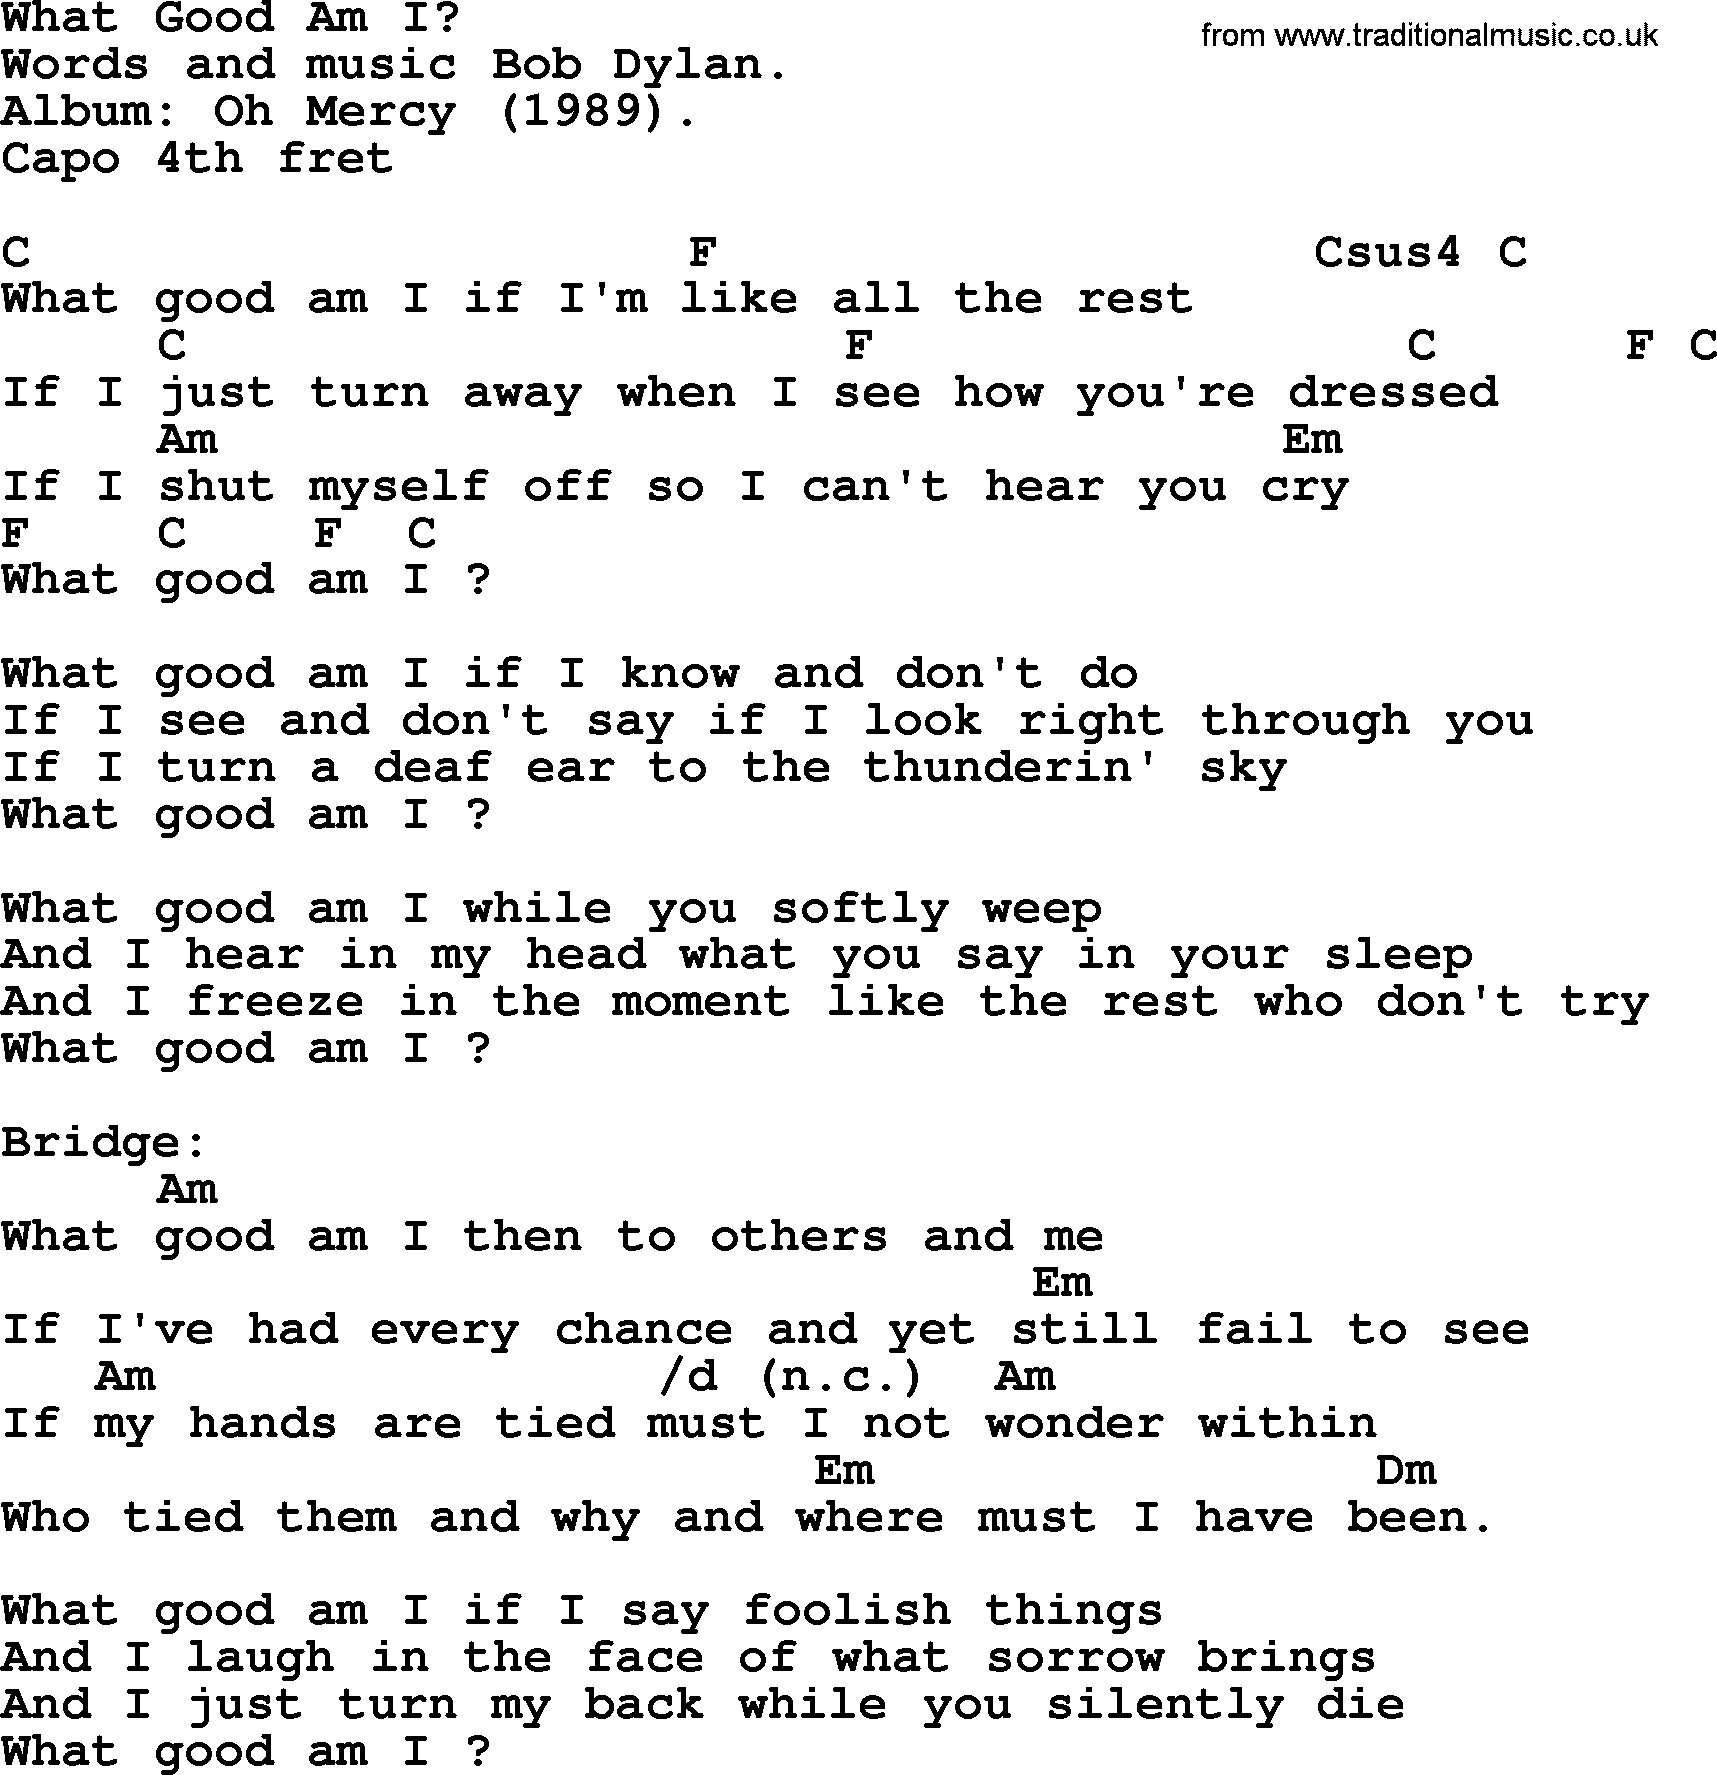 Bob Dylan song, lyrics with chords - What Good Am I